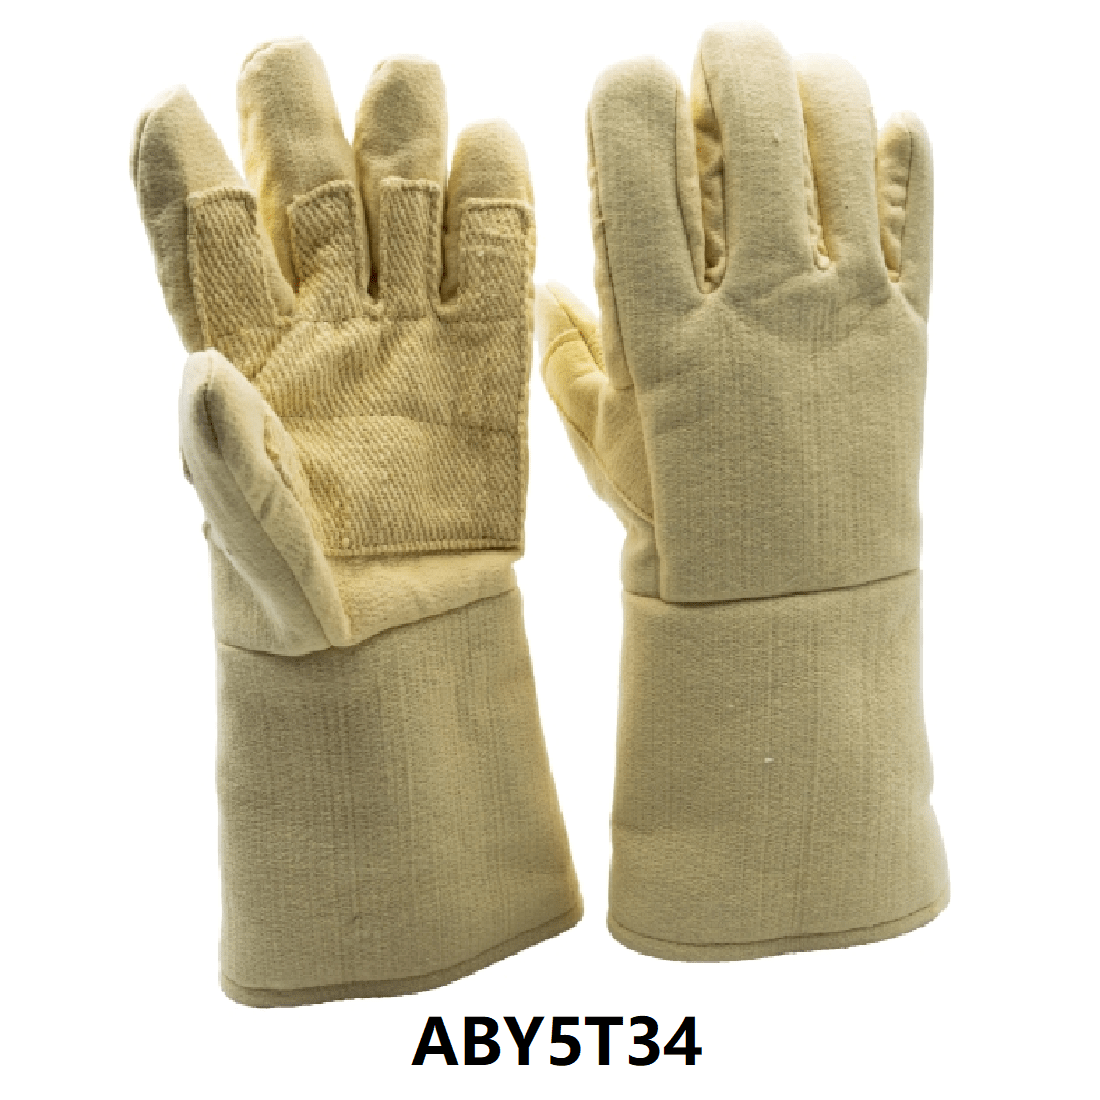 MTP anti-cut level 5 glove for summer with high breathability